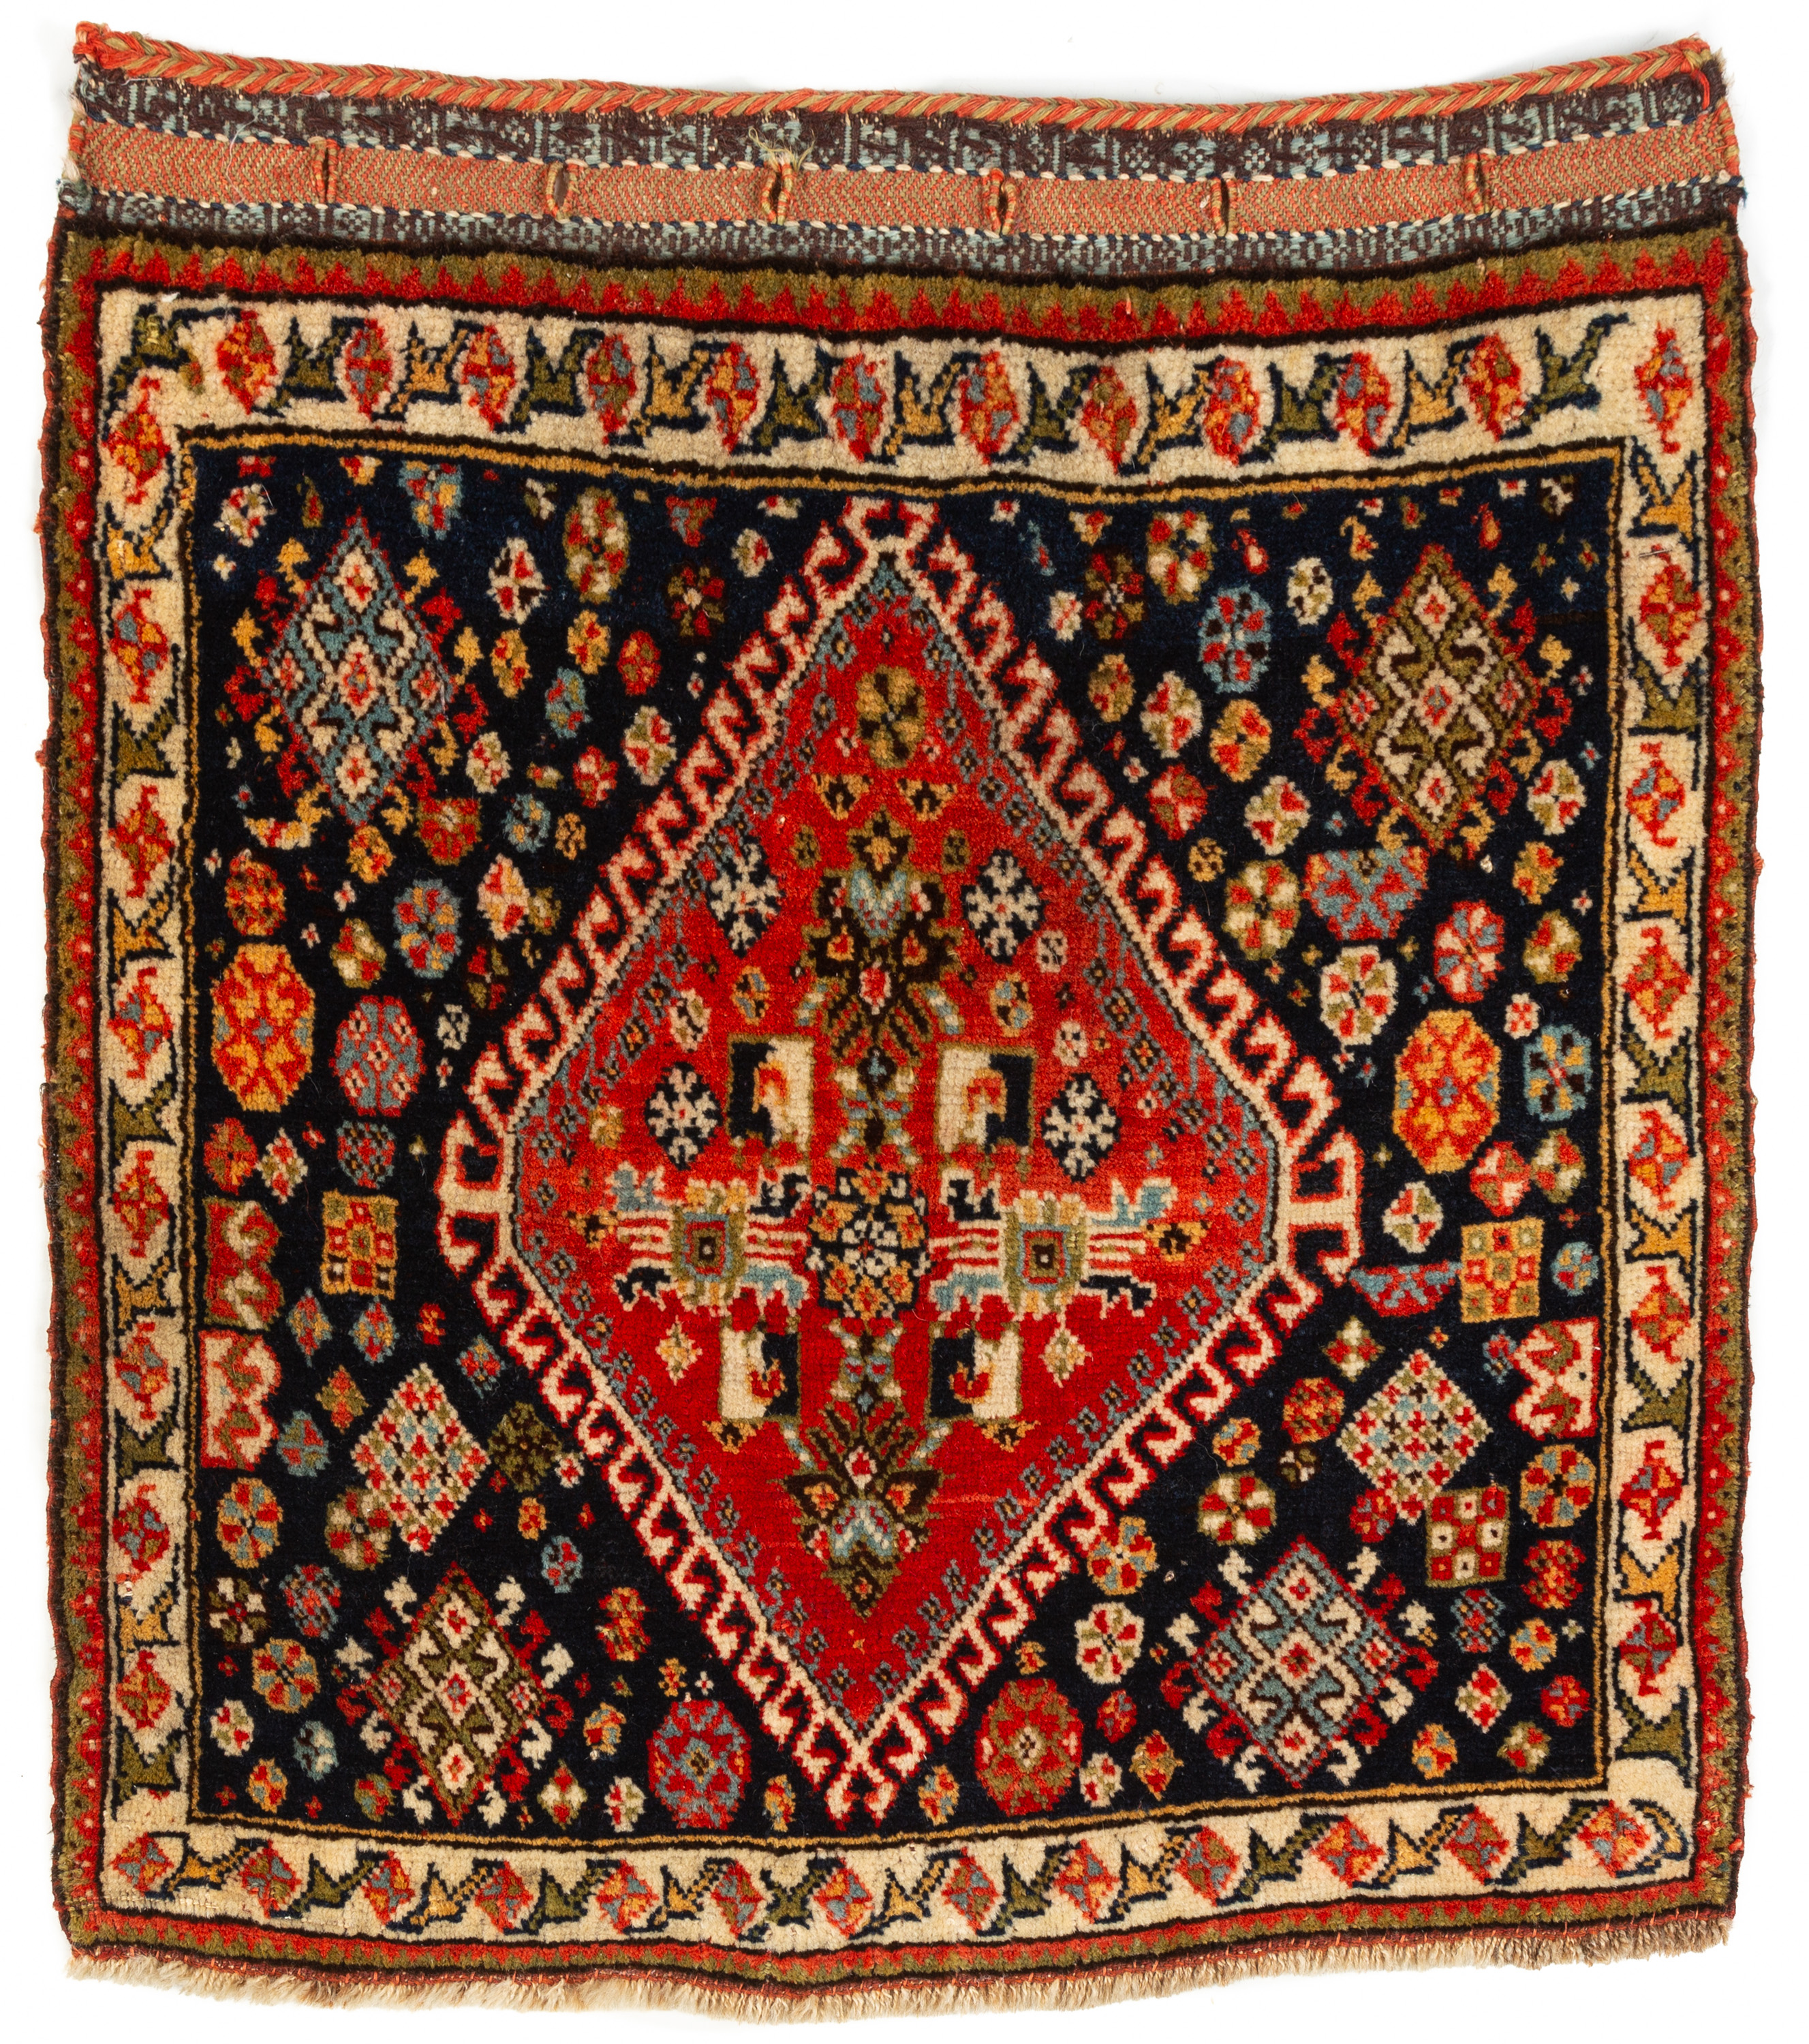  2 BAG FACE ORIENTAL RUGS Early 28d761